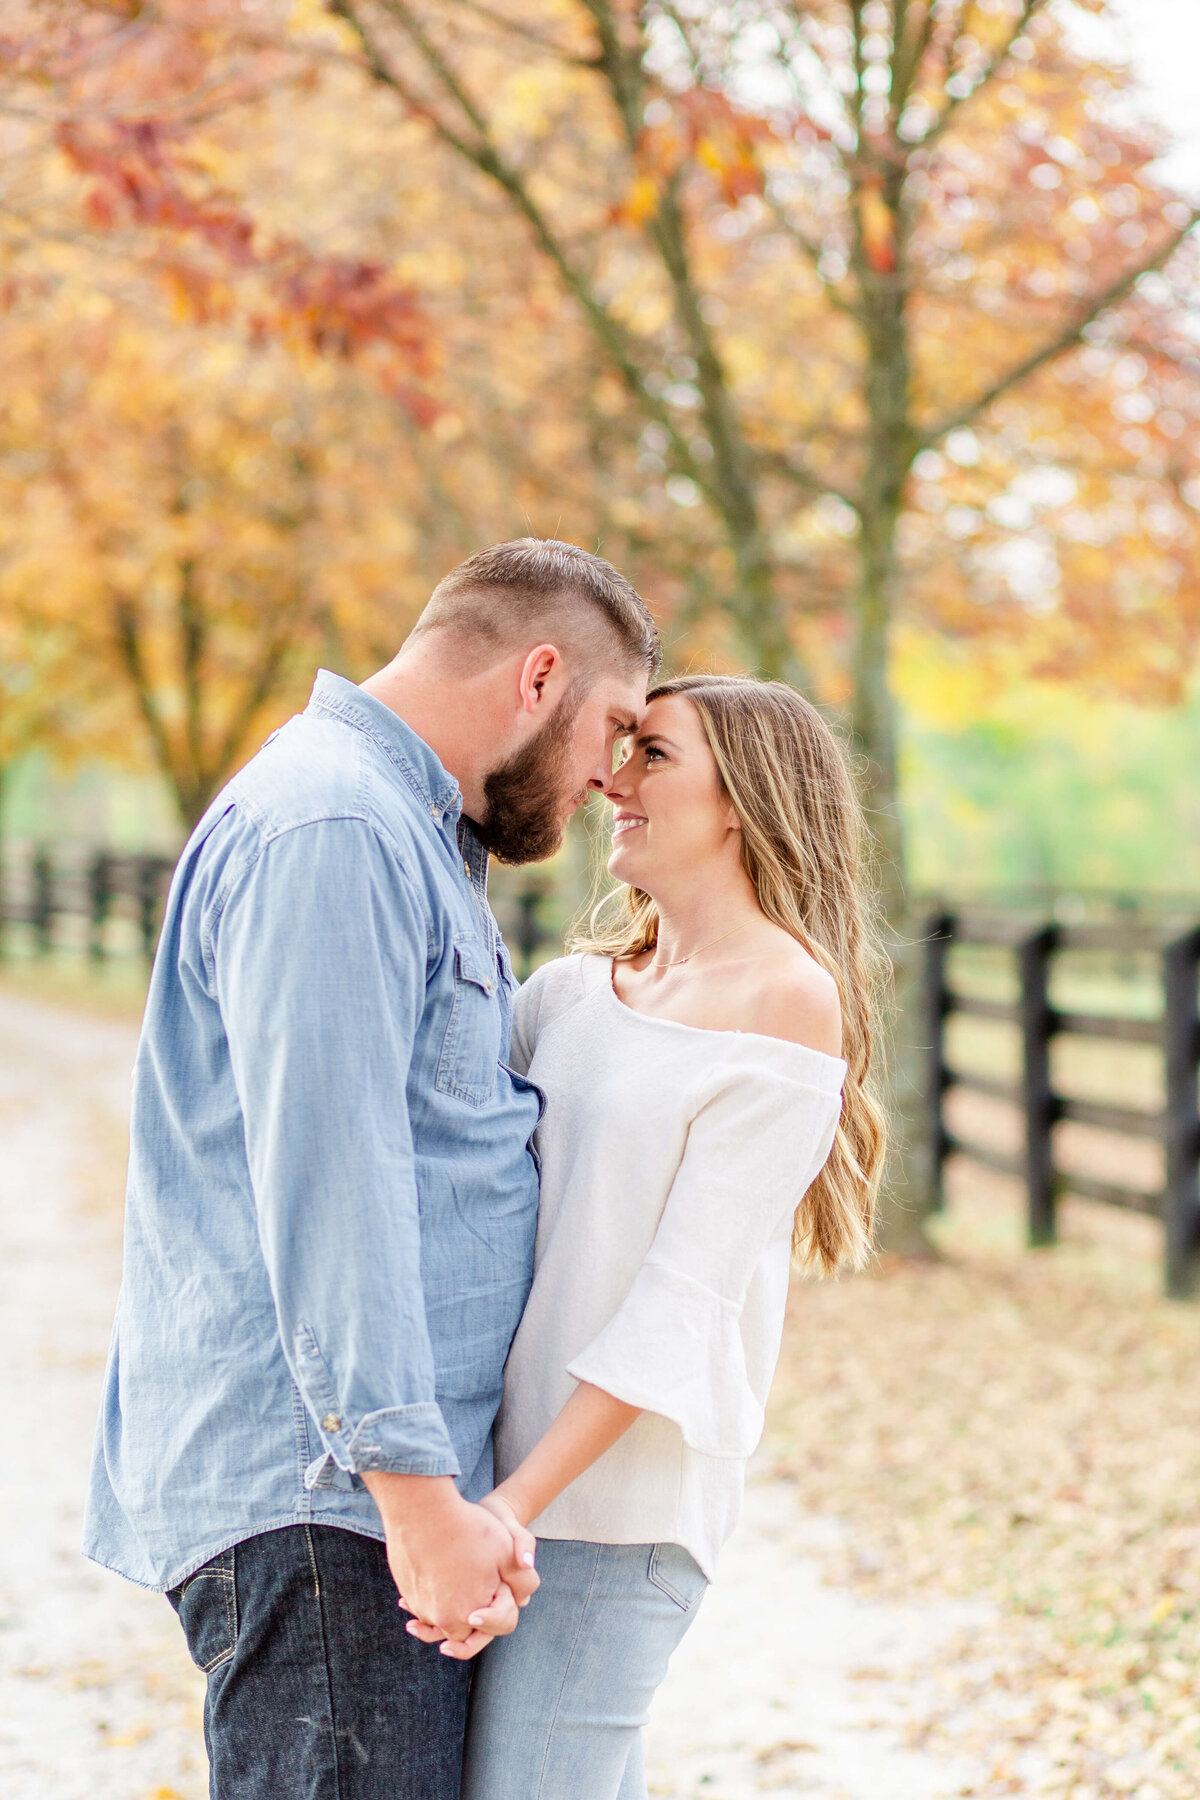 Fall-leaves-engagement-session-light-and-airy-wedding-photographer-Bethany-Lane-2